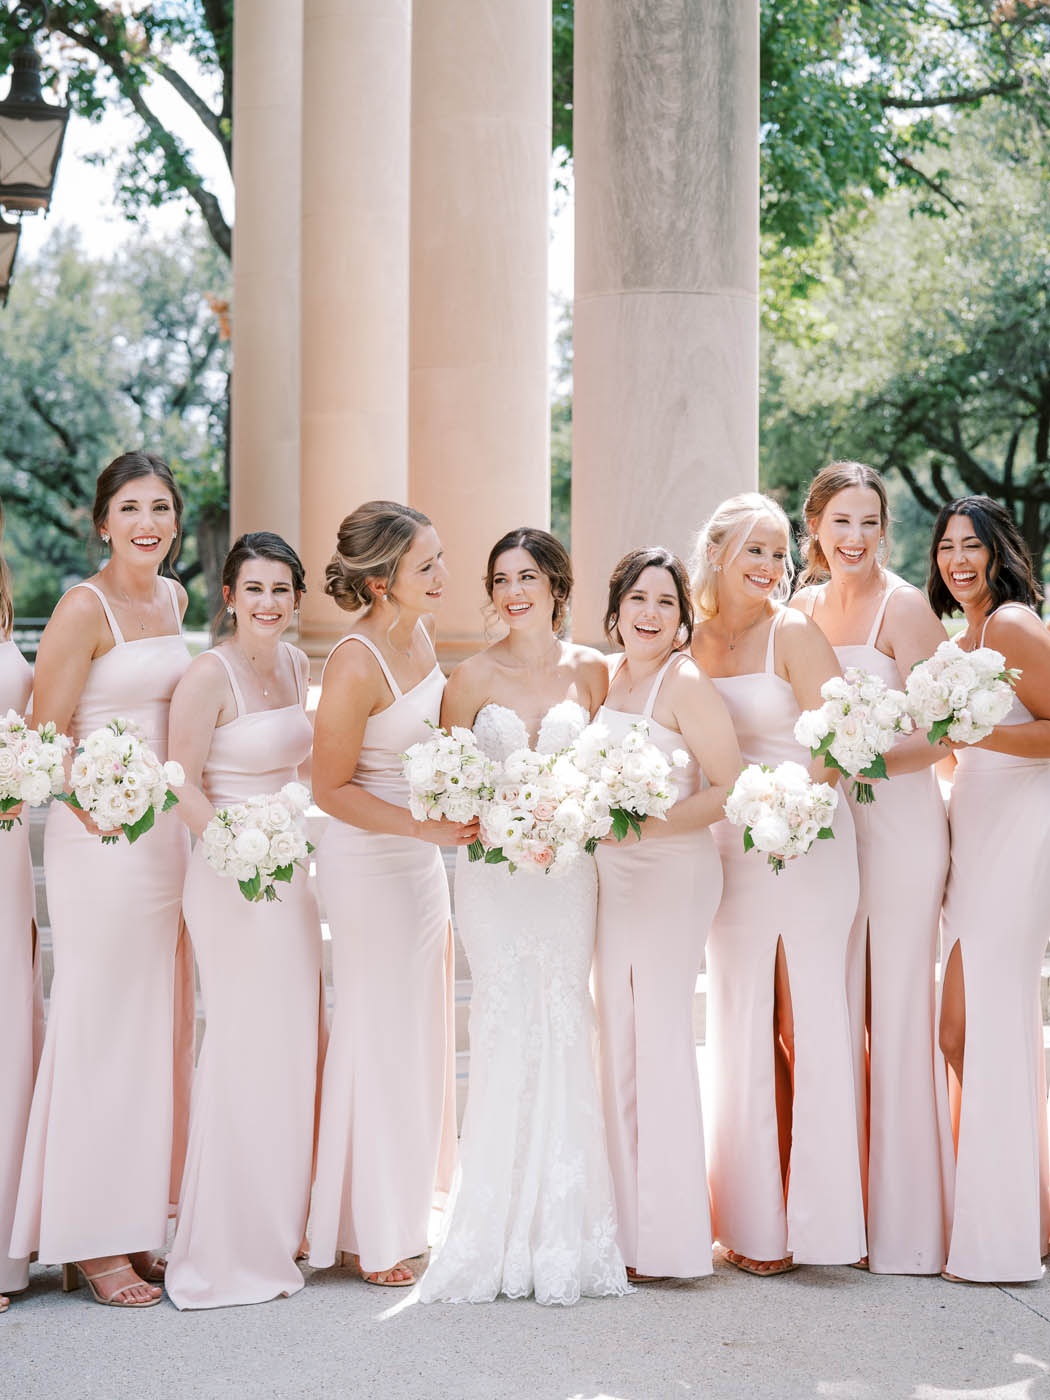 The bride and bridesmaids laugh together